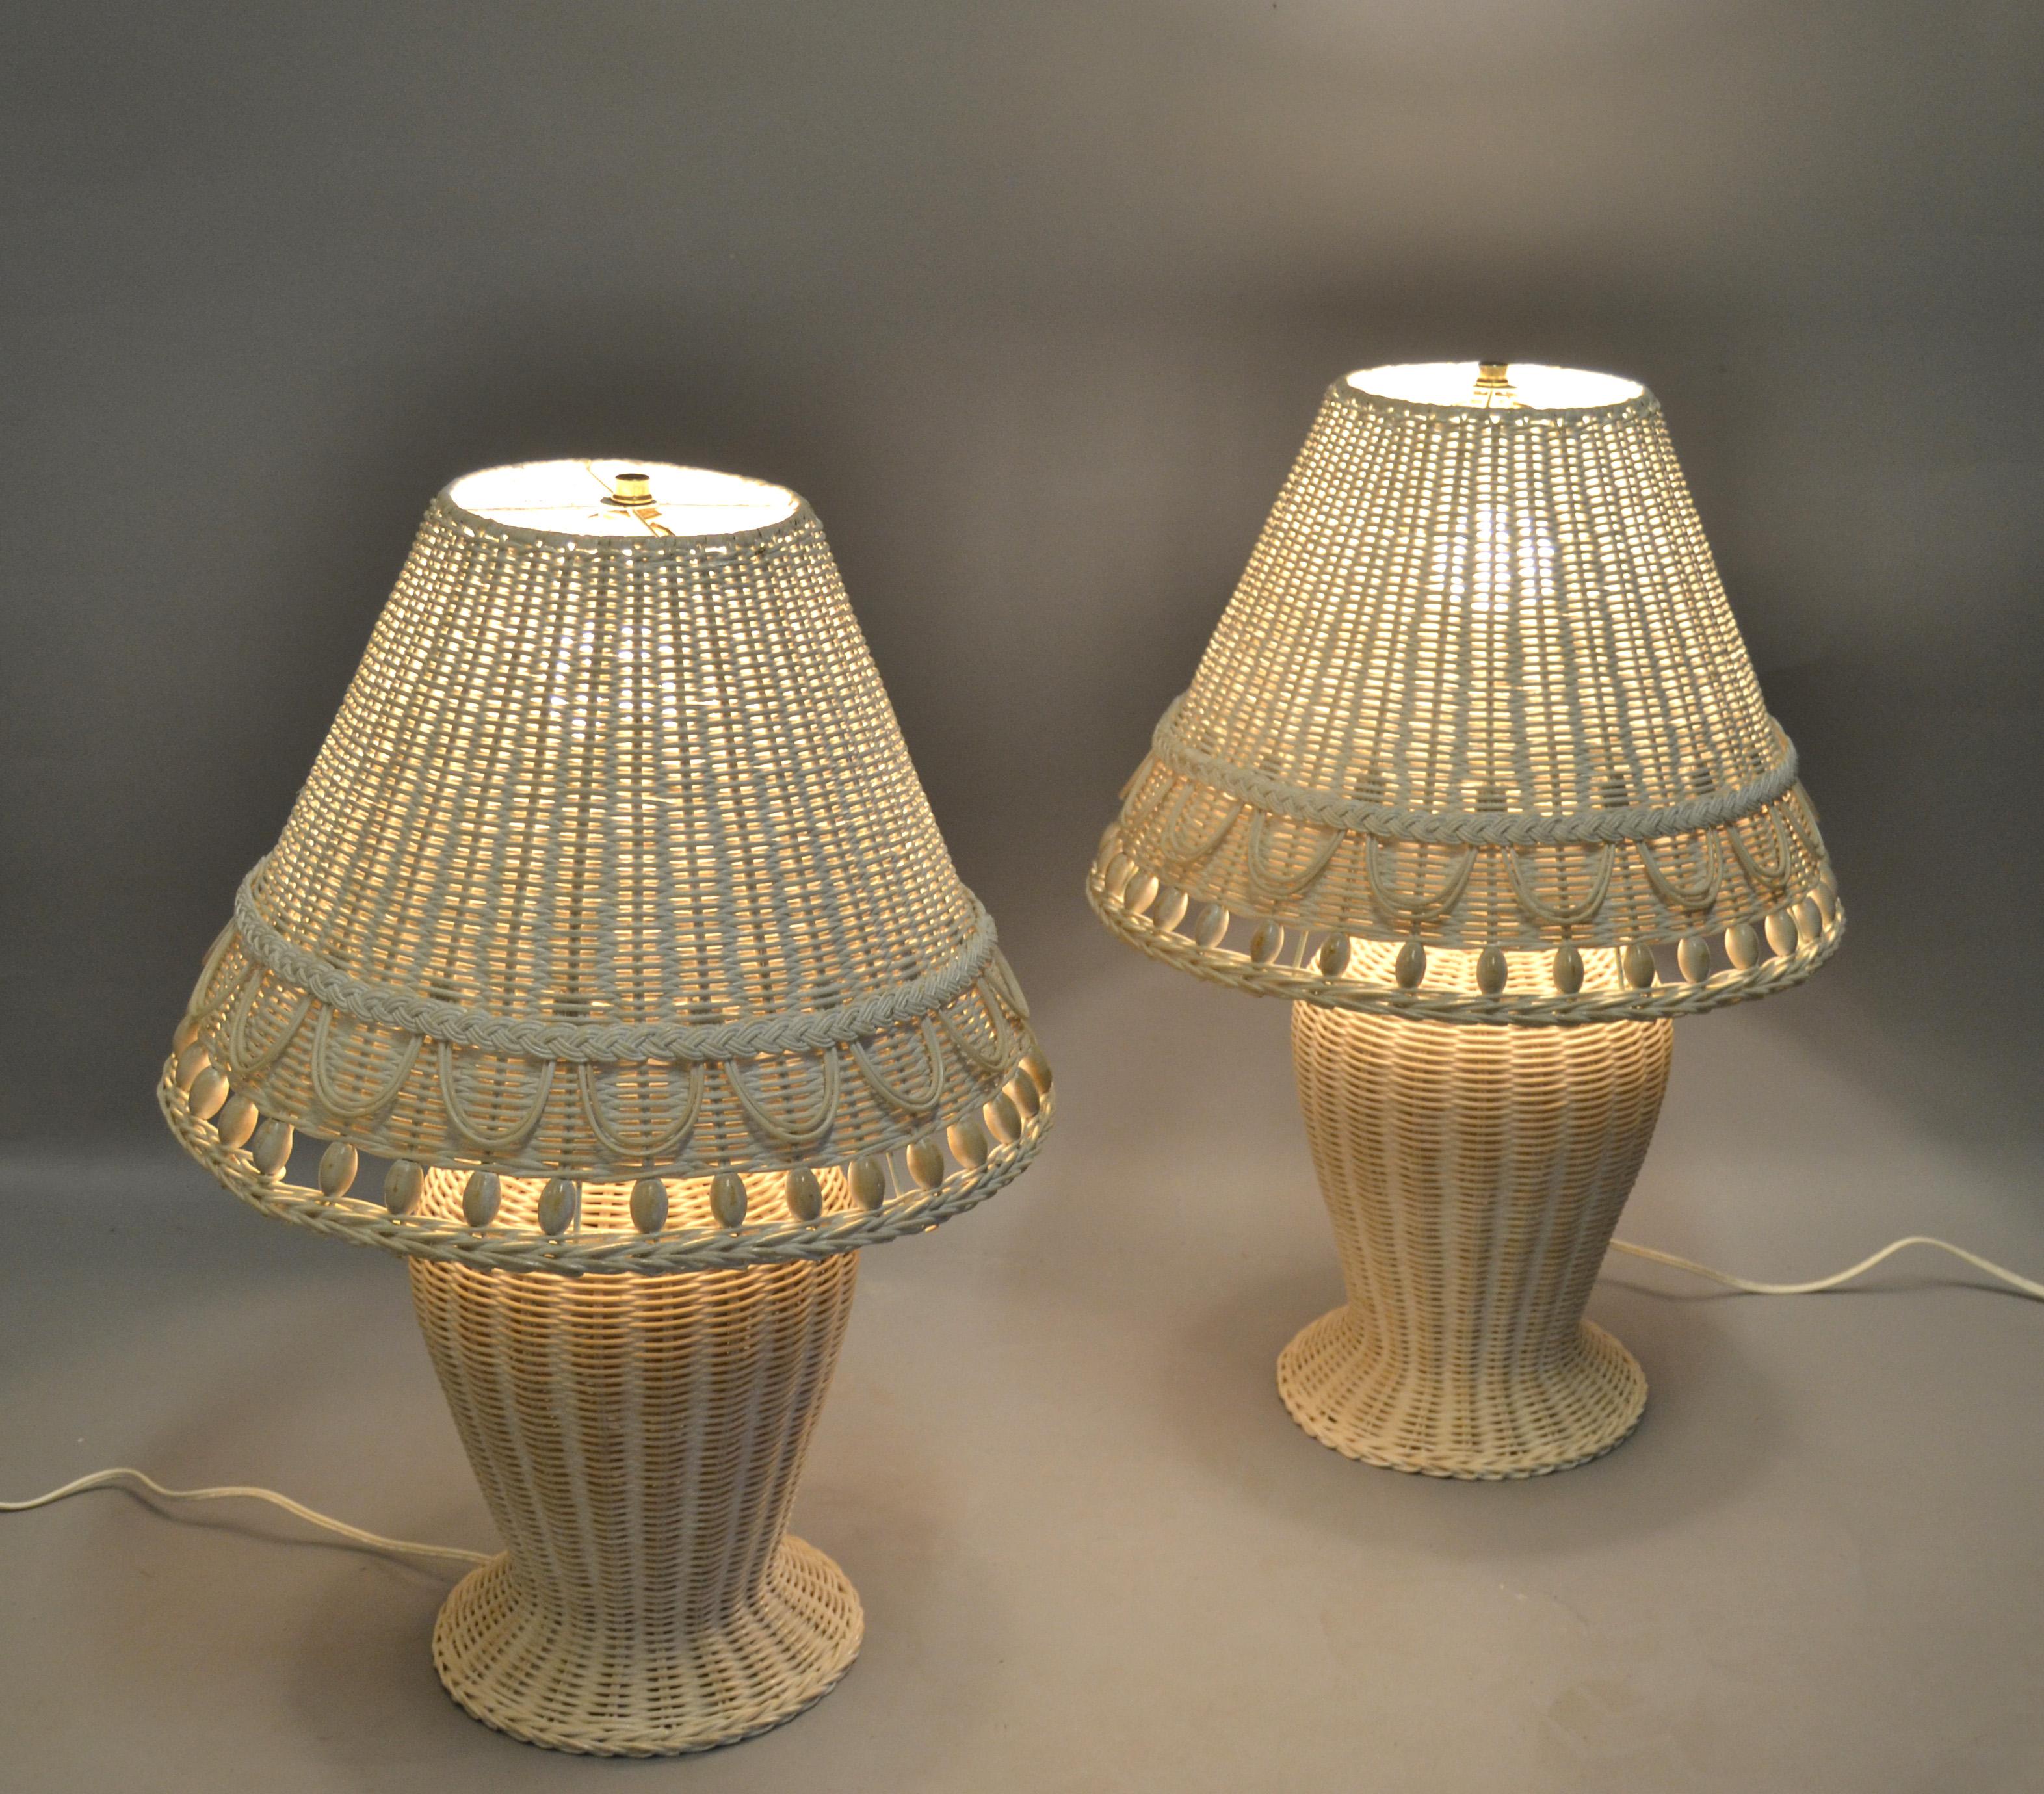 Pair of charming Bohemian Chic bleached white handwoven wicker table lamps with beaded shades.
Brass Hardware for secure daily use.
US Wiring and each Lamp takes 1 regular or LED Bulb.
All around handcrafted in America in the 1980s this Set adds